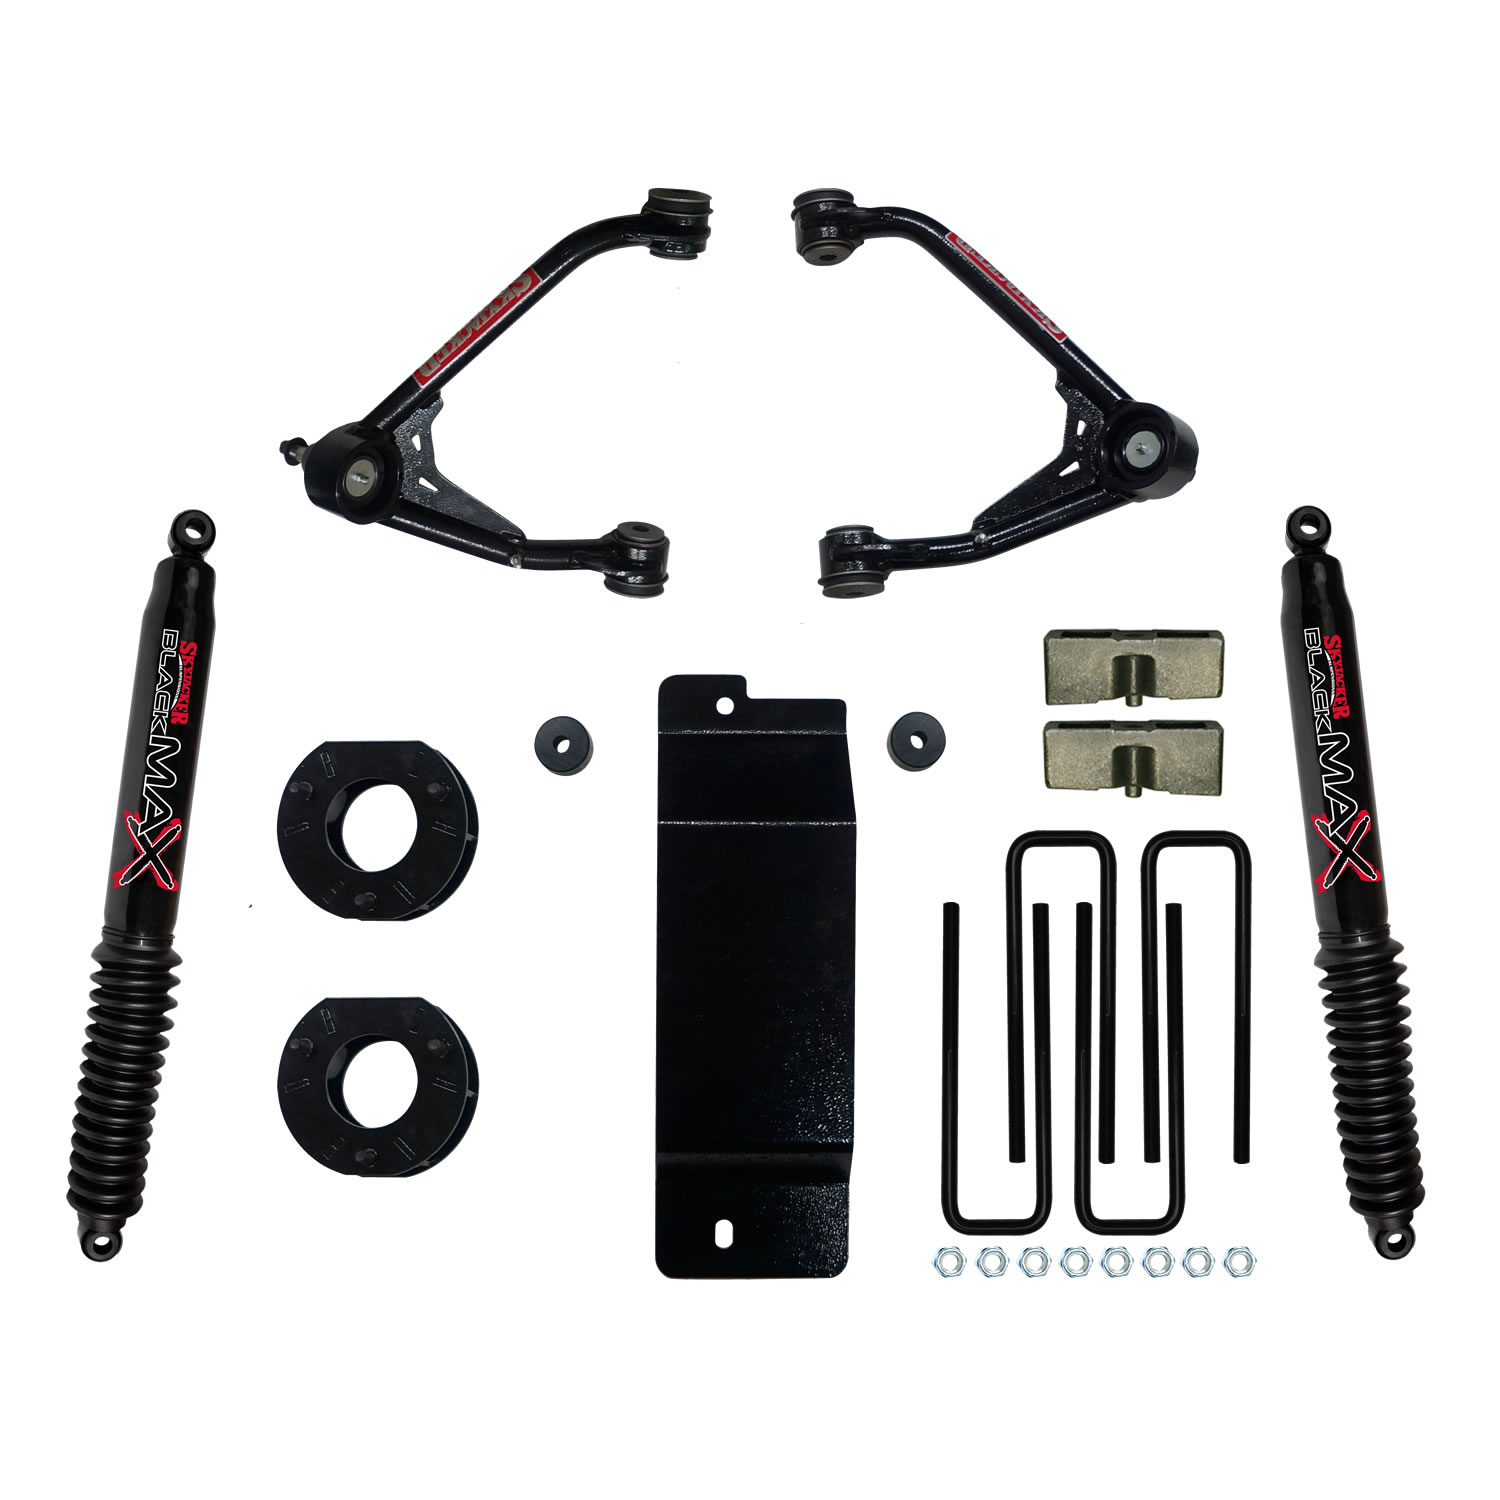 3.500-4.000 In. Upper Control Arm Lift Kit with BlackMax Rear Shocks